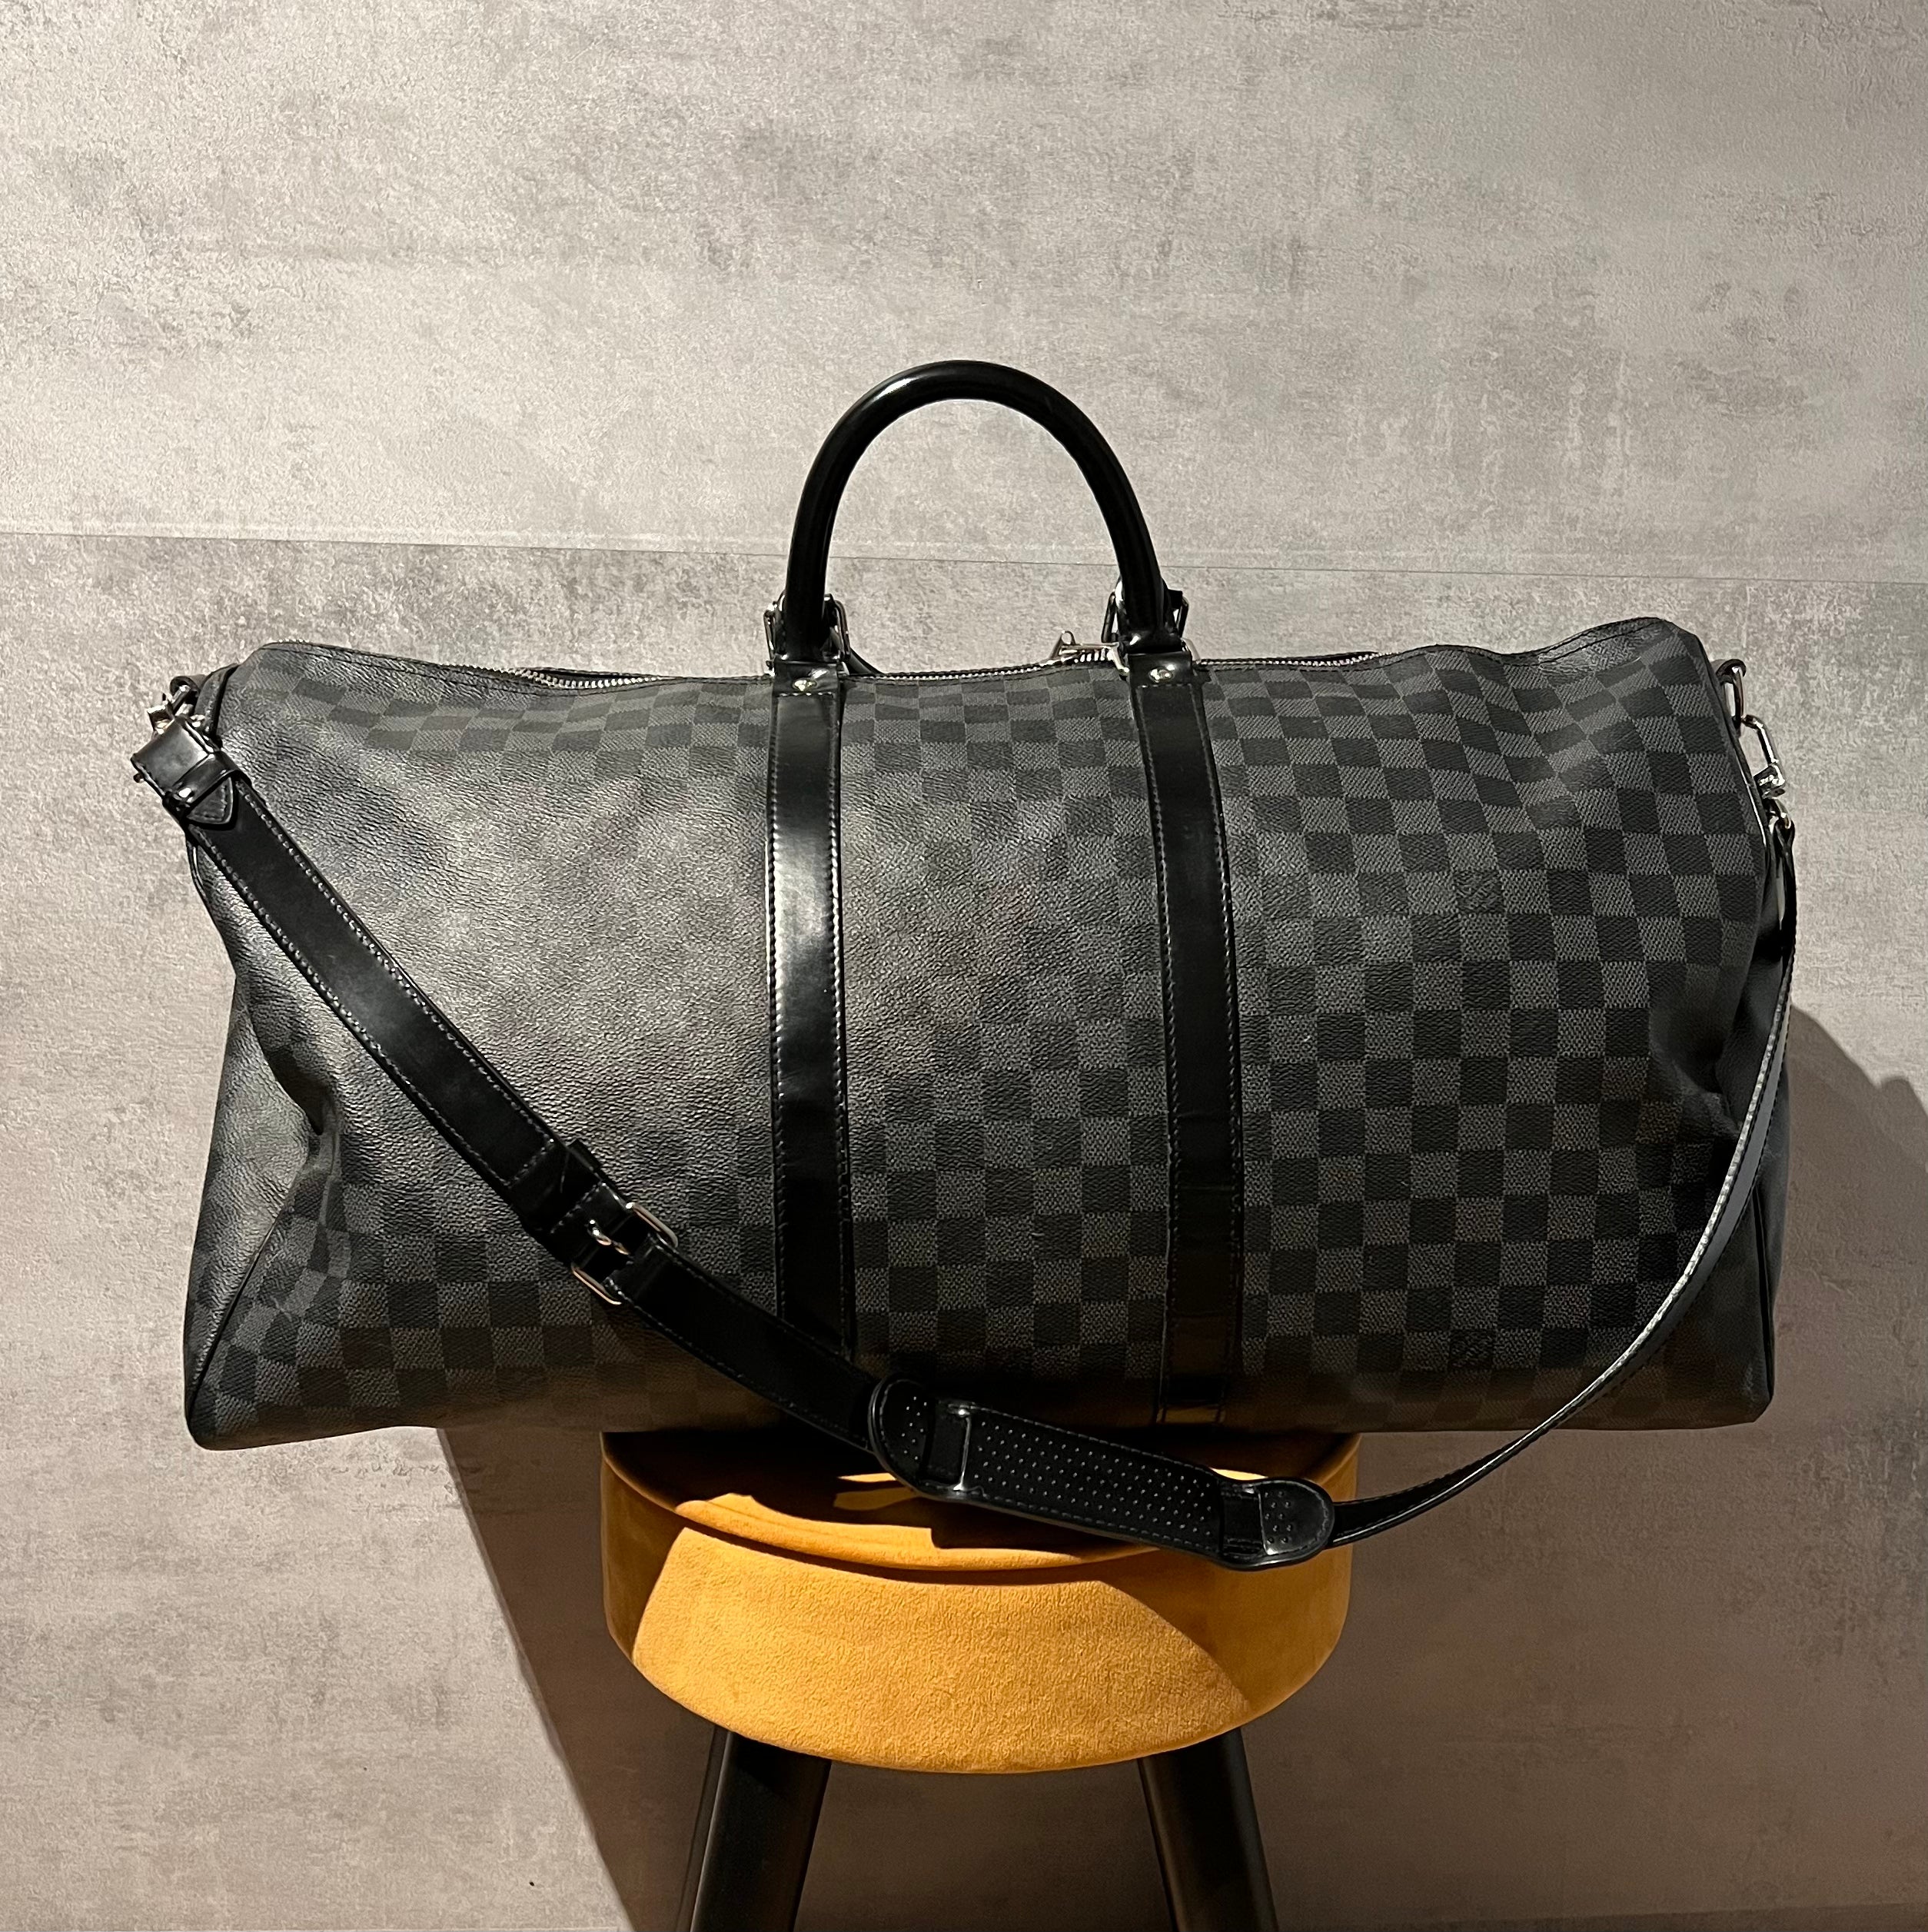 Louis Vuitton Limited Edition Keepall Bandoulière 55 in